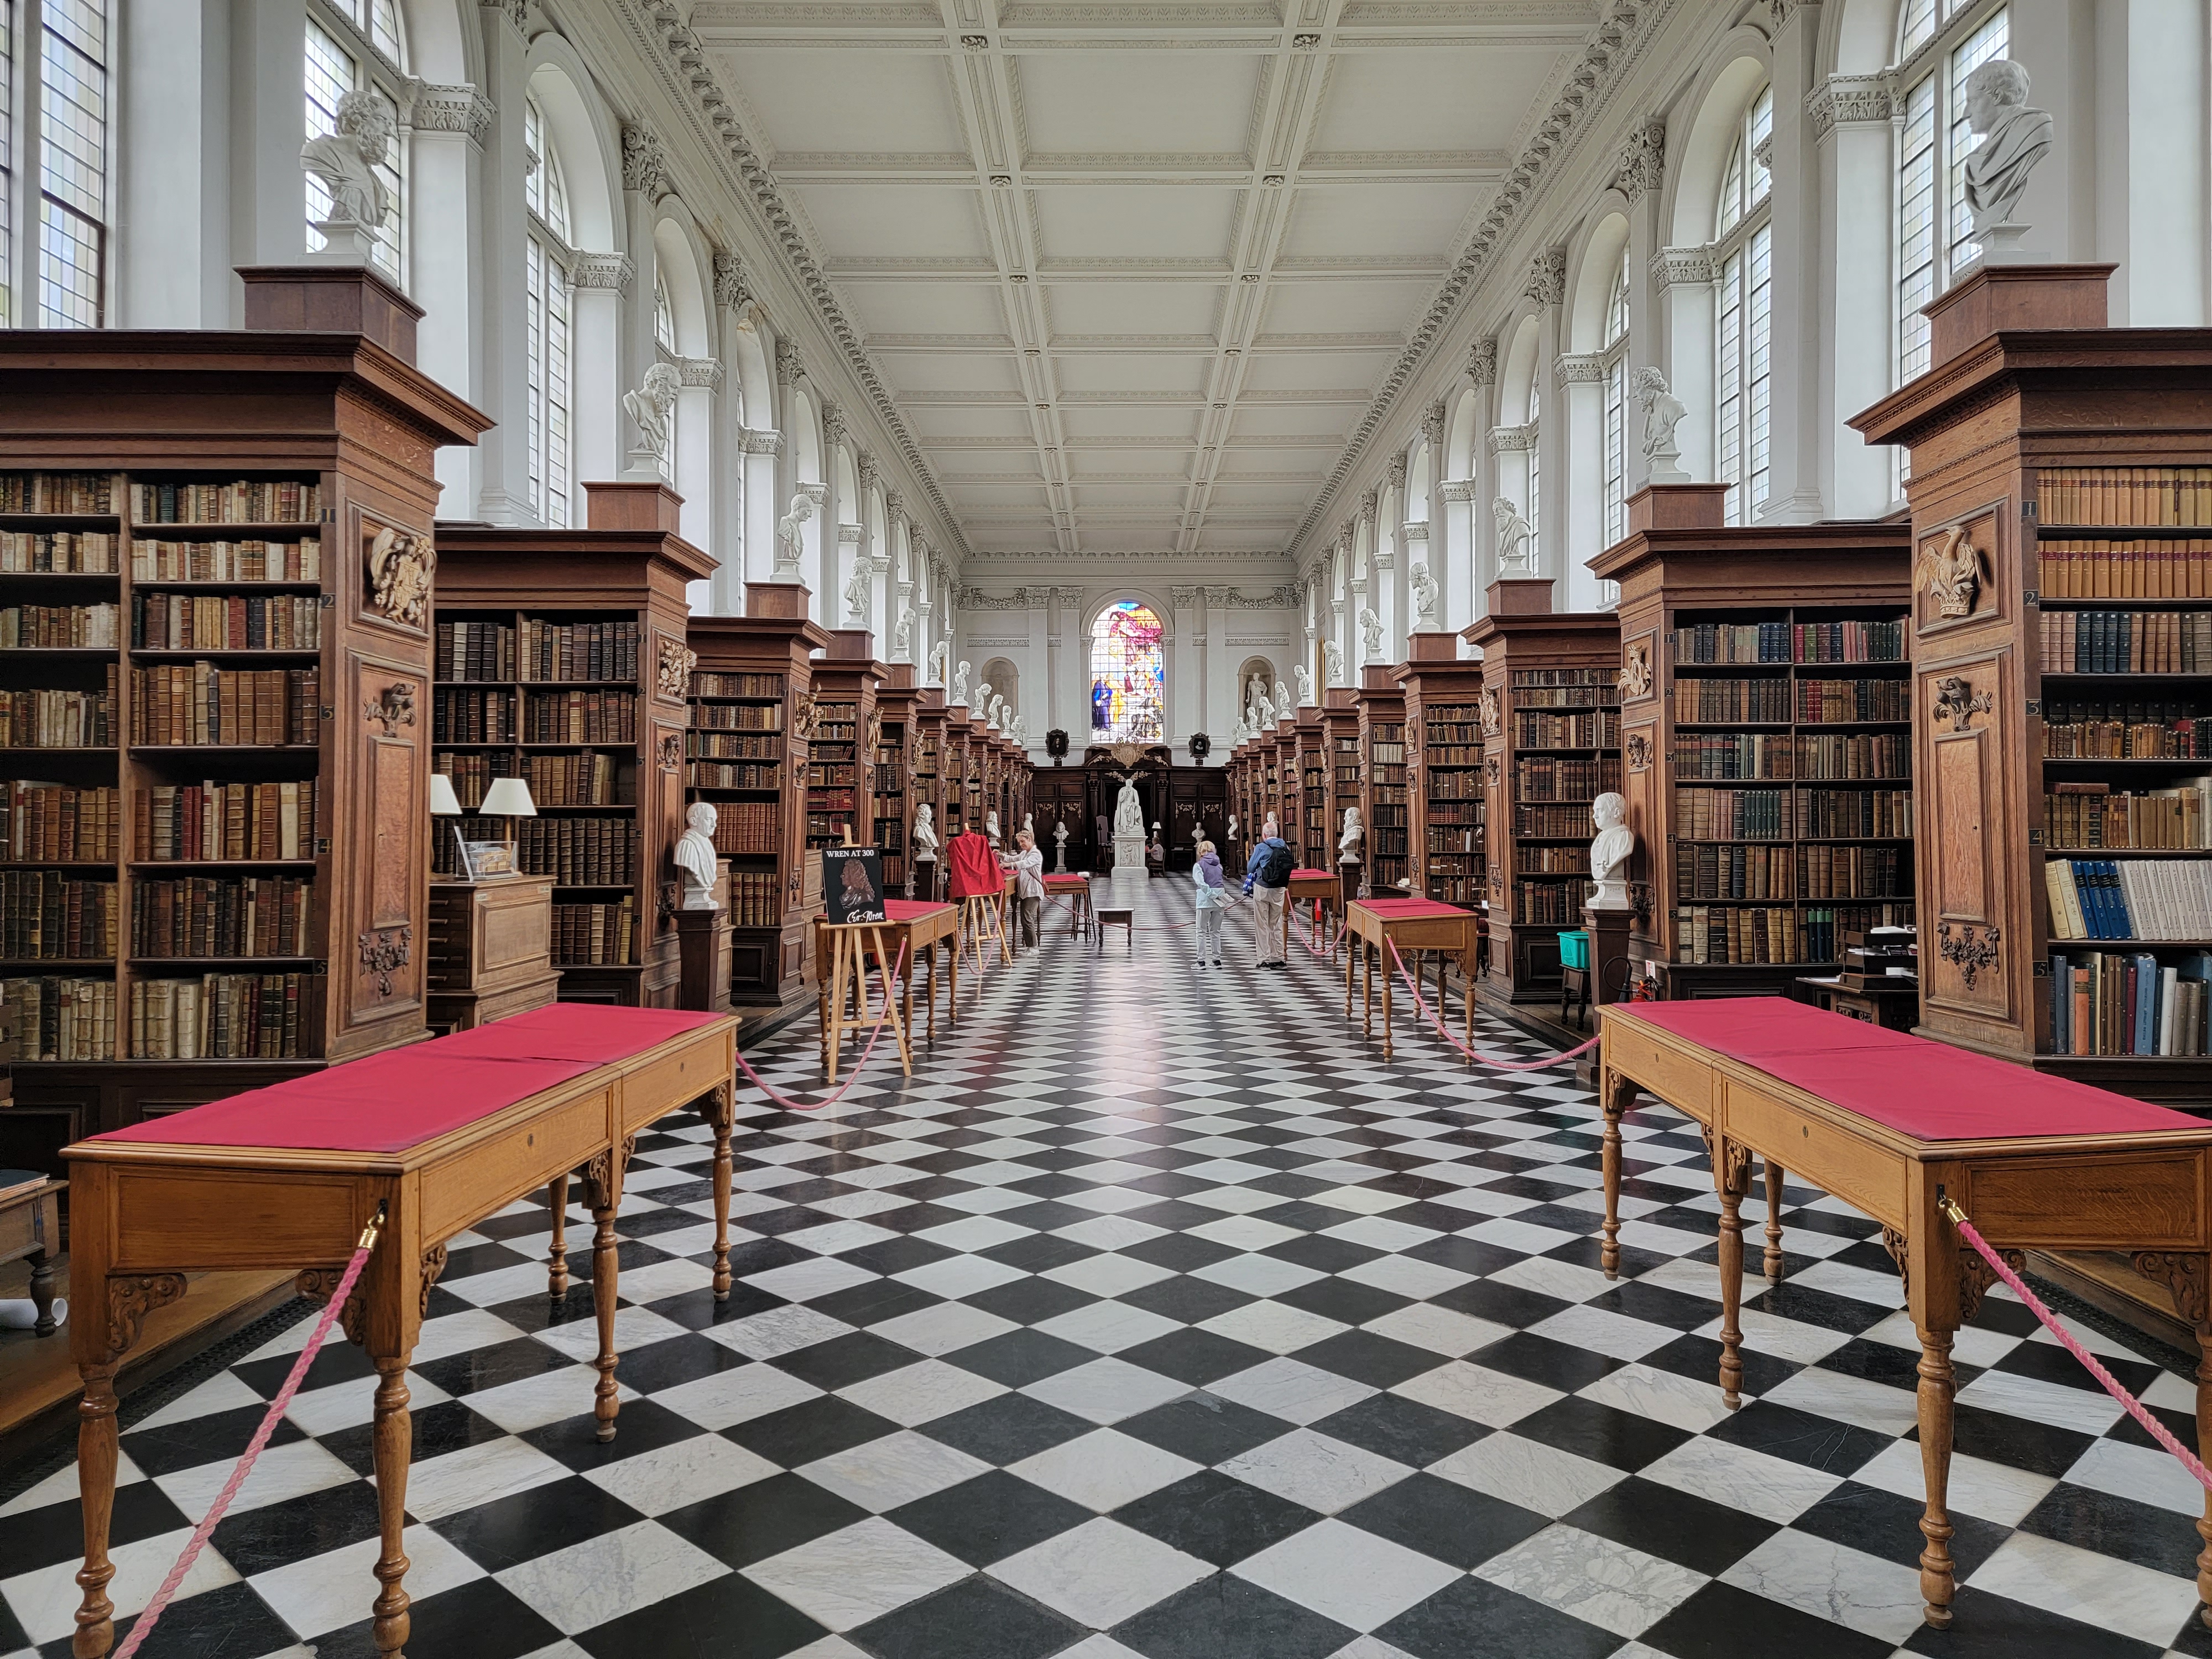 The interior of the Wren Library, taken from the entrance and facing towards the statue of Byron.